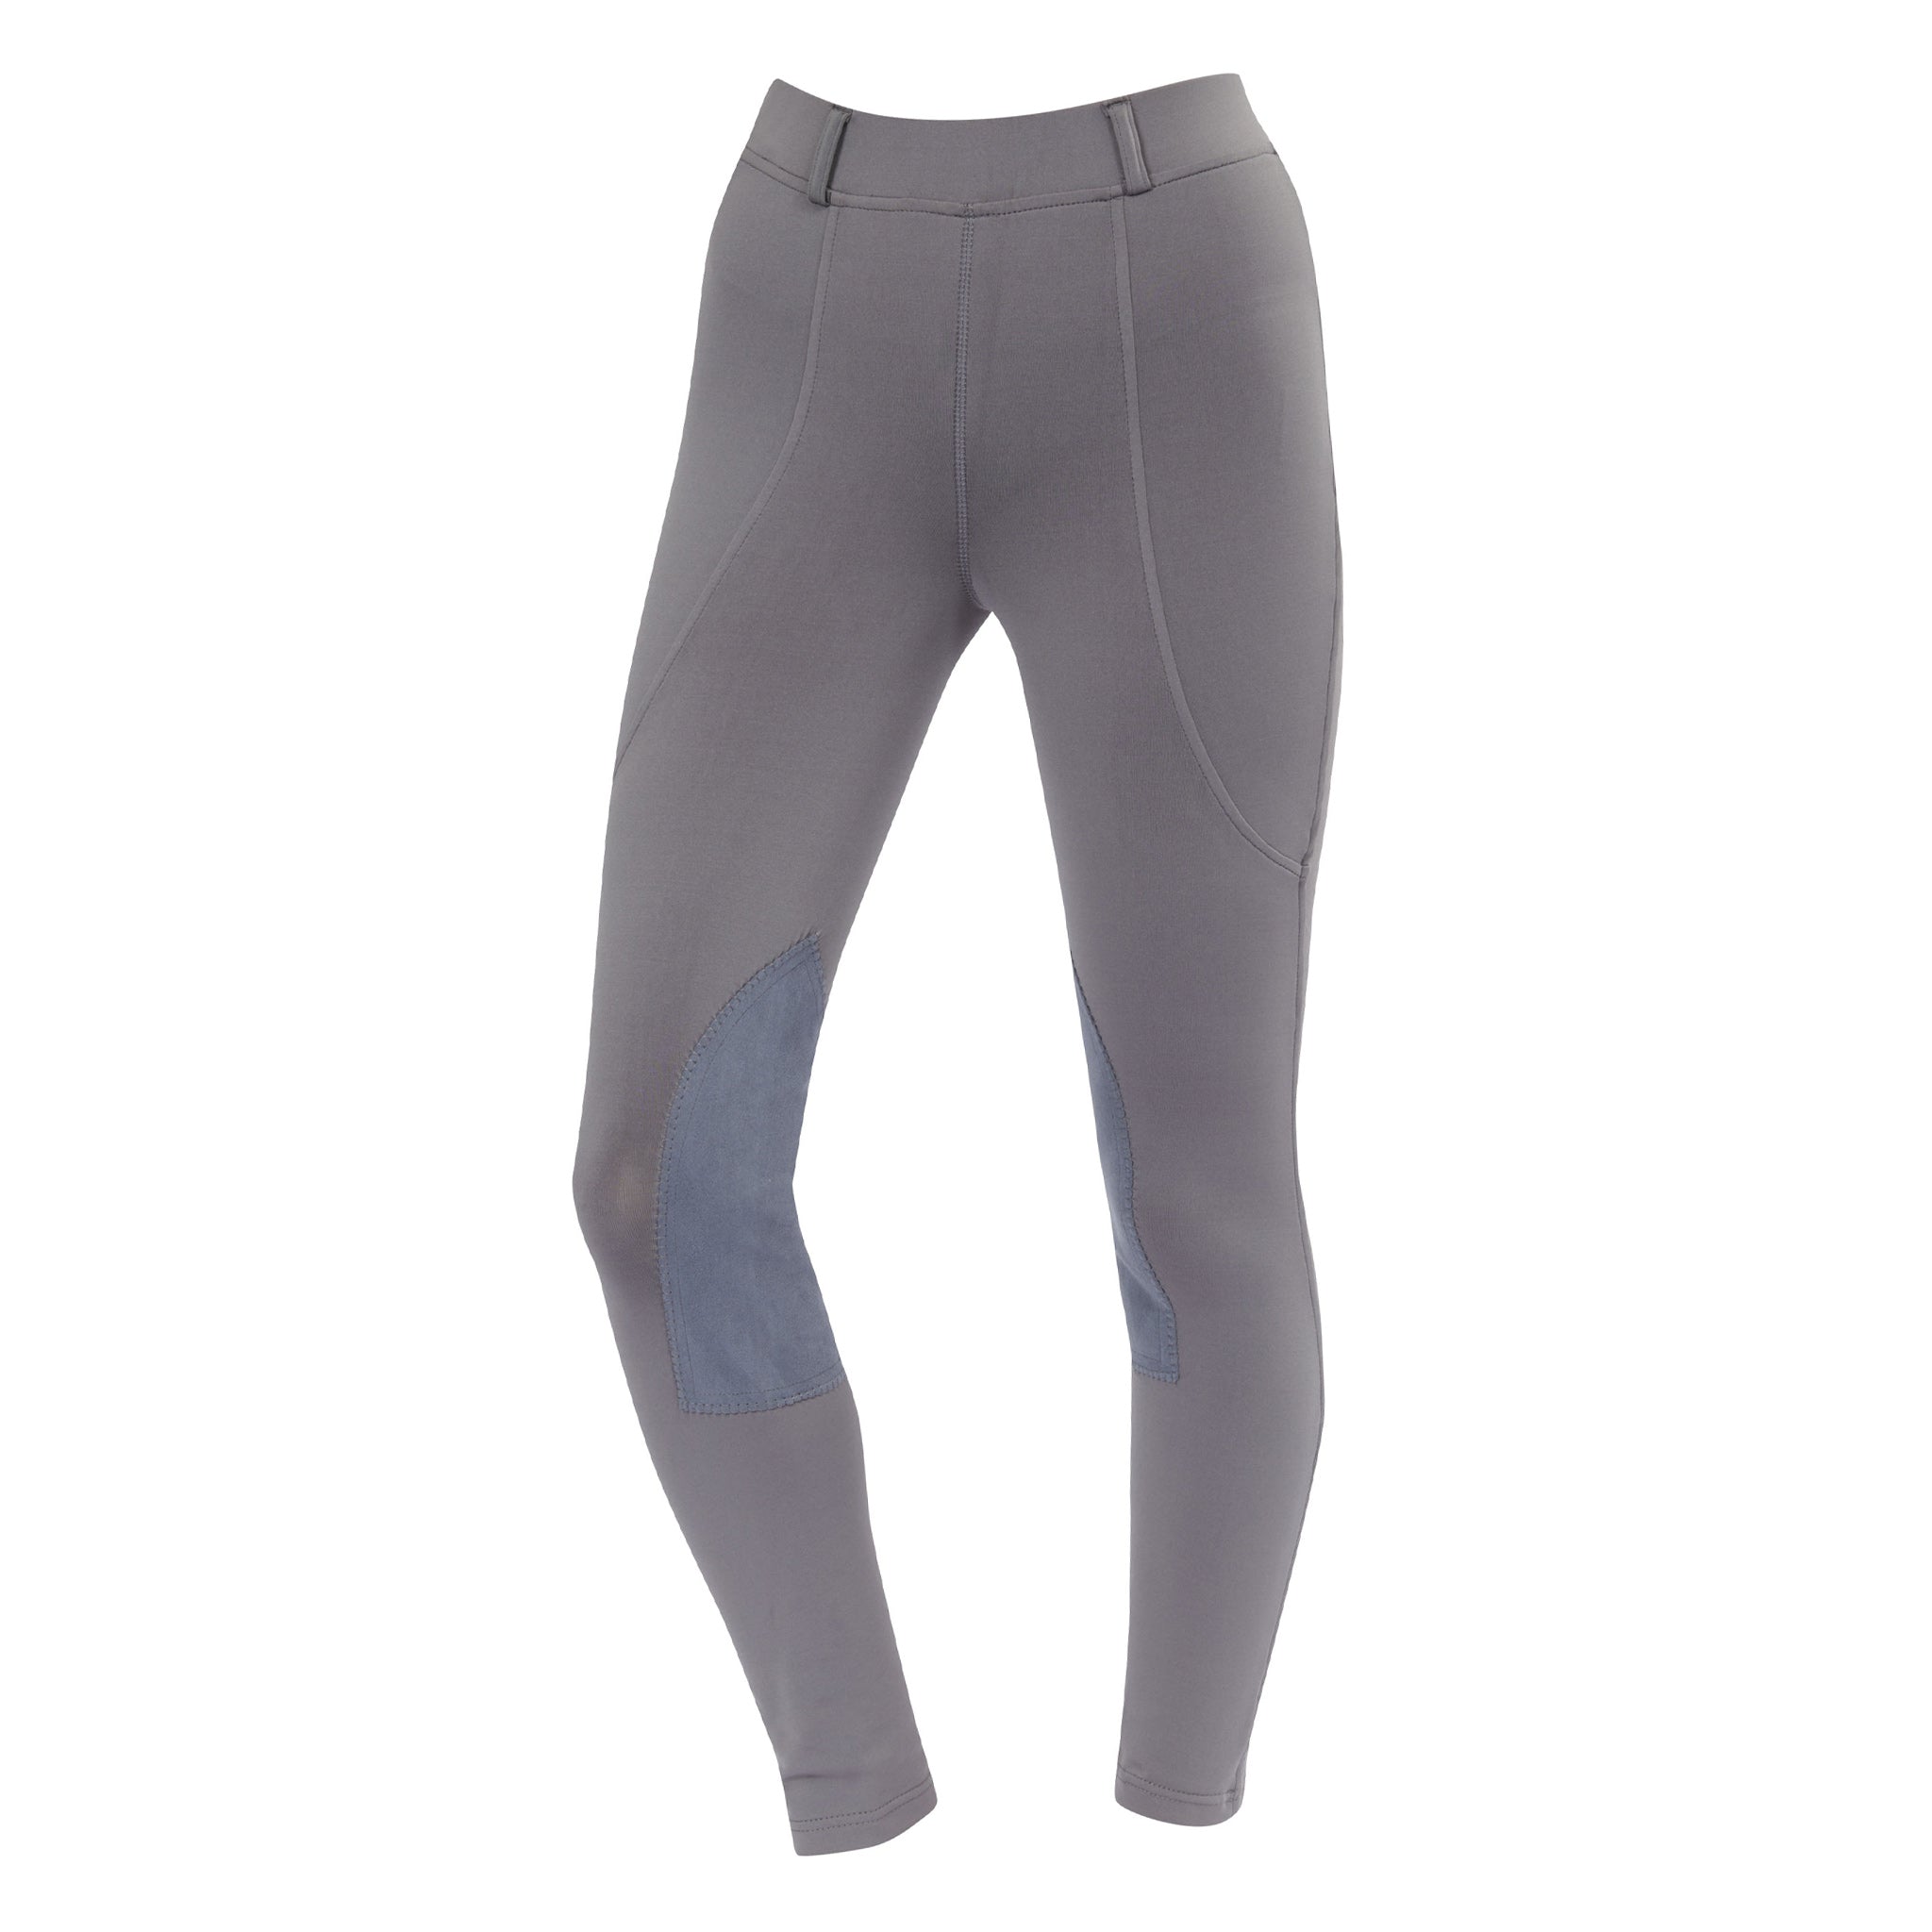 Dublin Children's Performance Flex Alos Knee Patch Riding Tights 591273 Grey Charcoal Front View